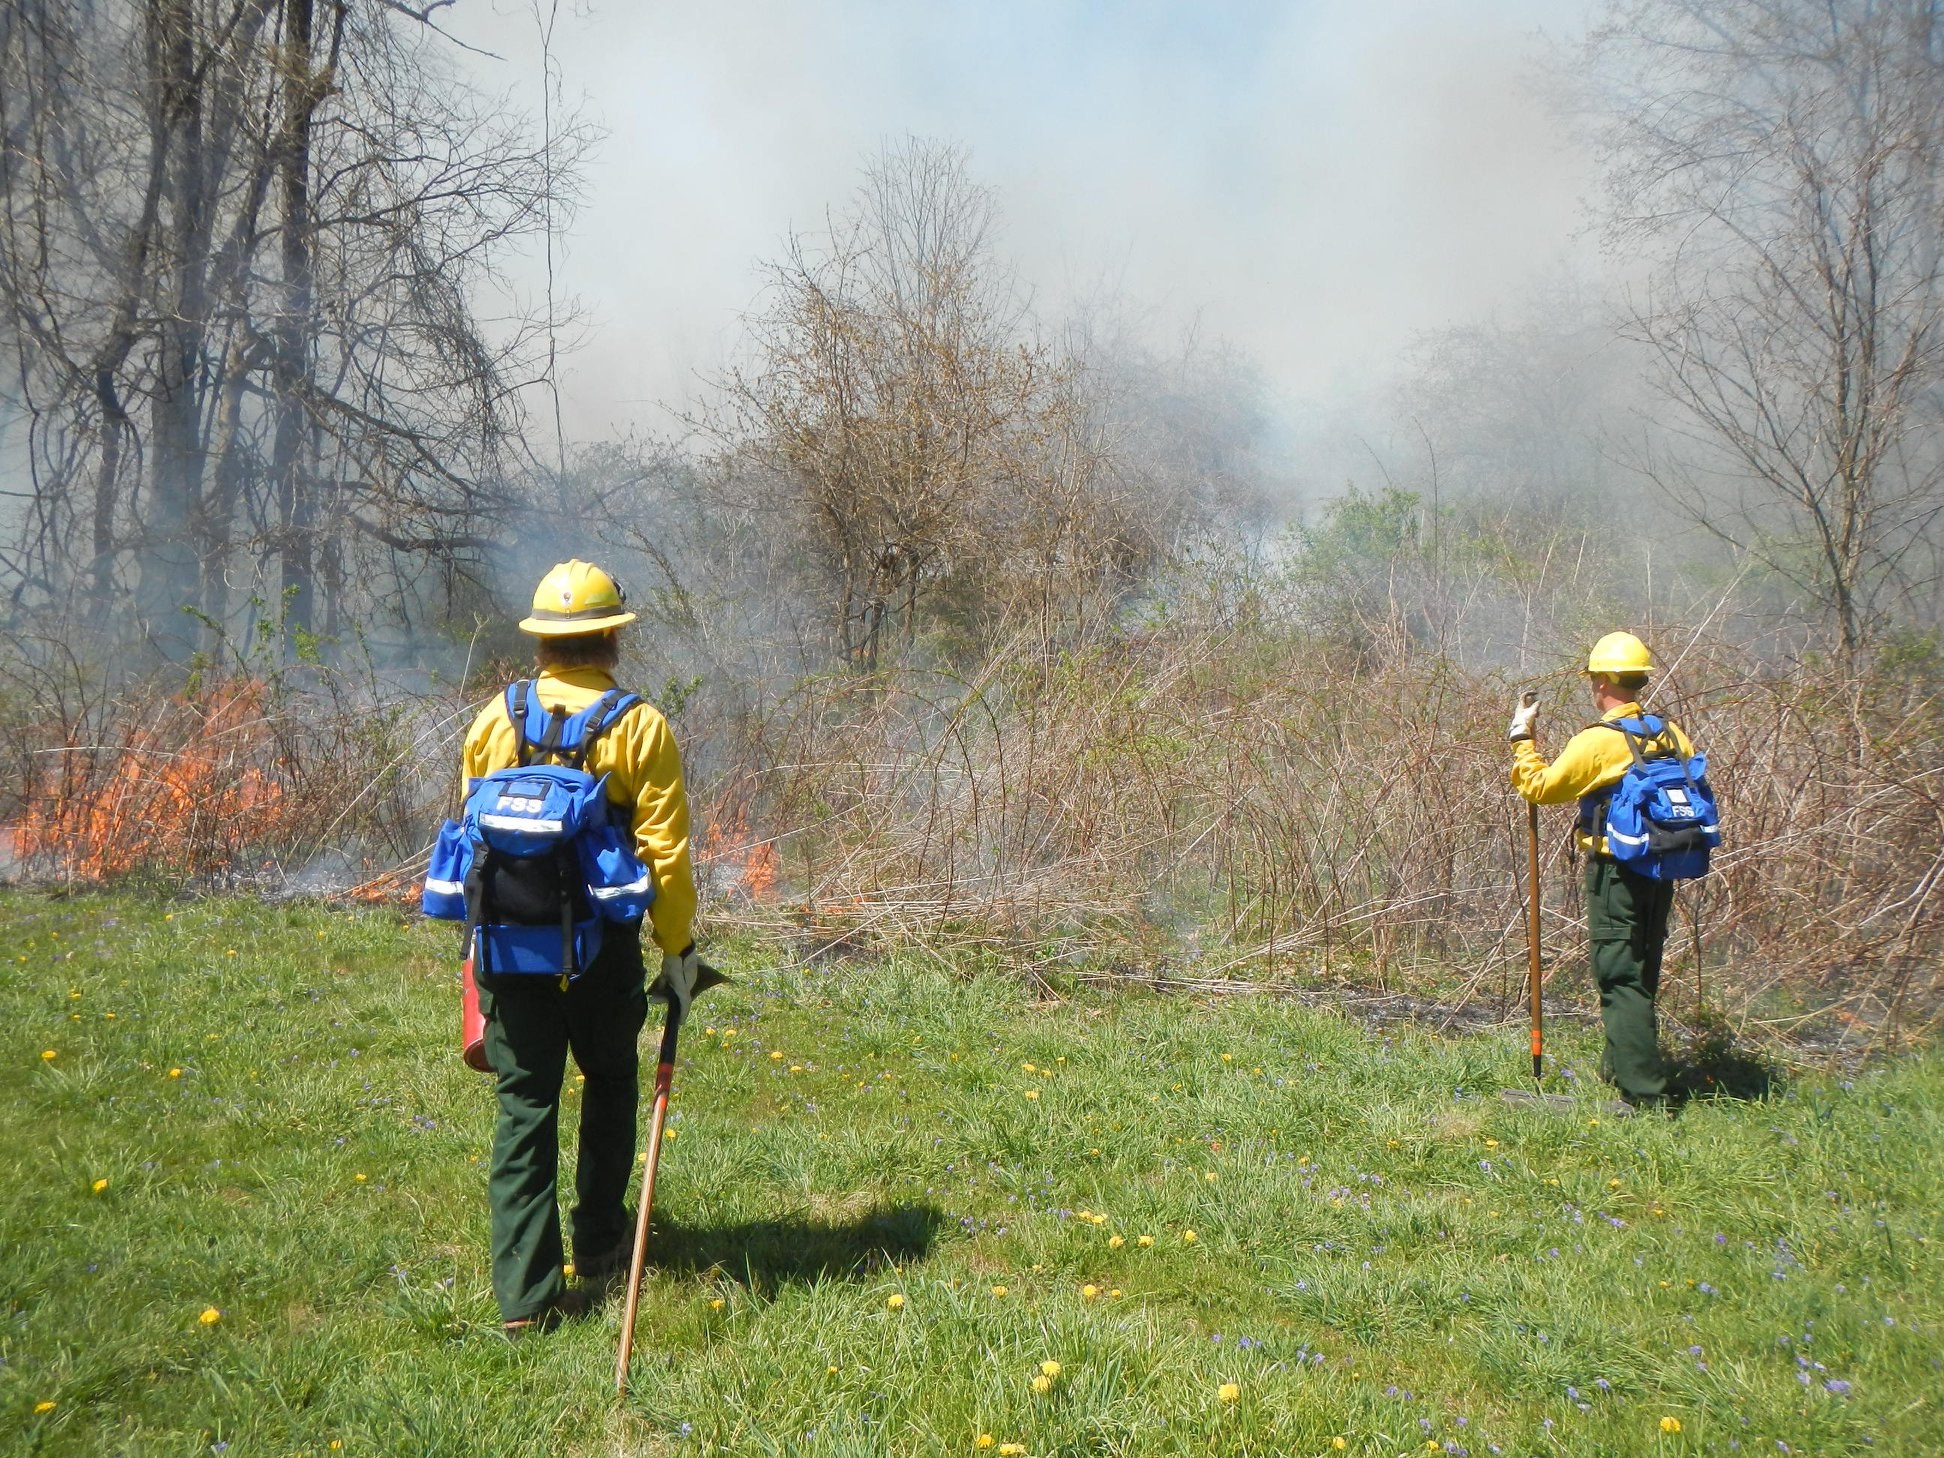 Bottom half: 2 firefighters in yellow helmets standing in green grass. Top half: burning dry brush, smoke, and leafless trees.